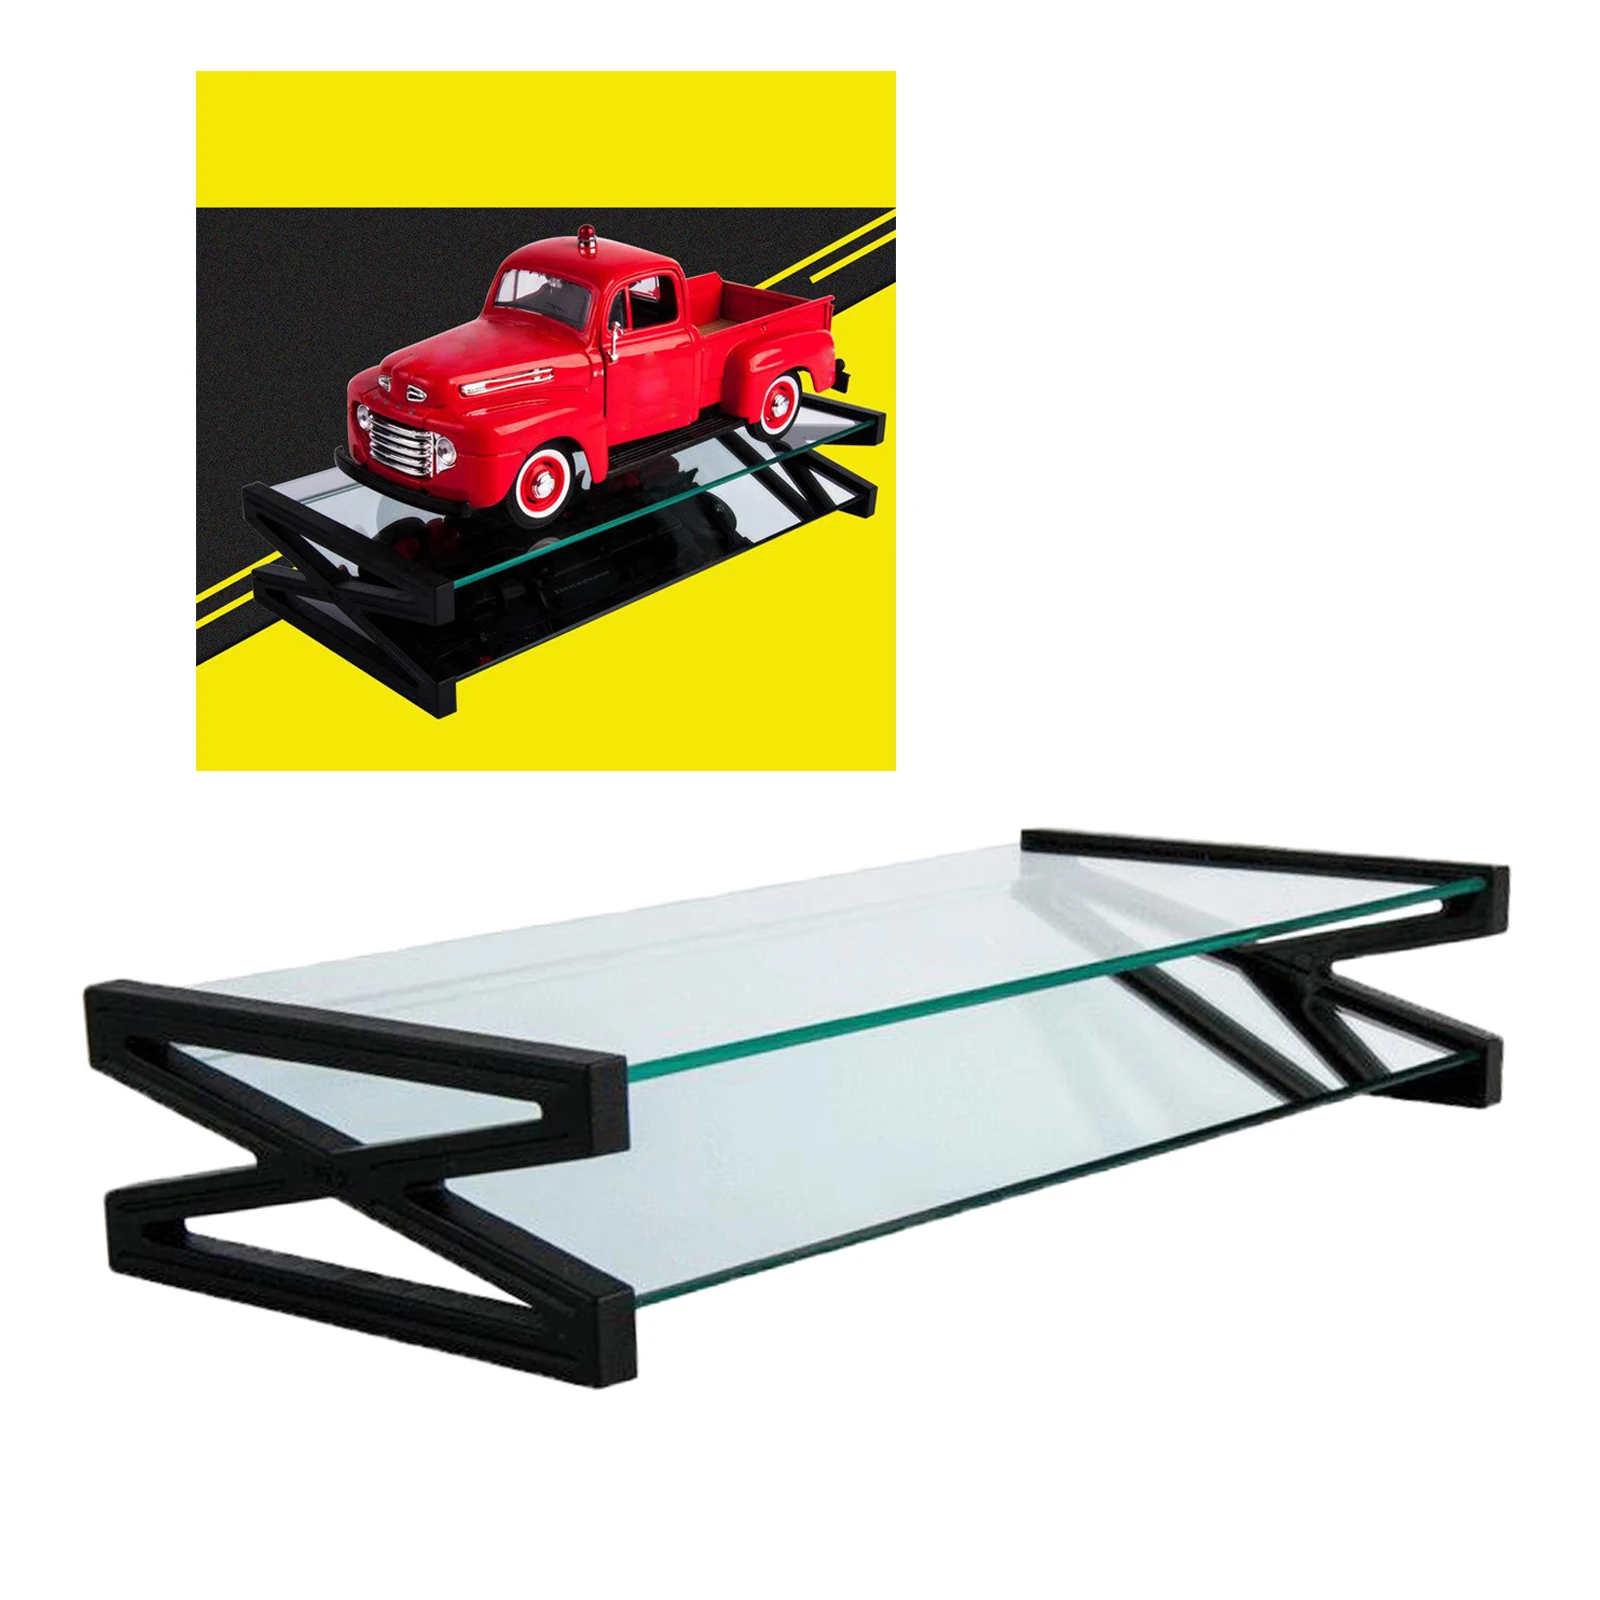 1:18 Scale Transparent Display Stand Base Case for Model Cars Action Figures